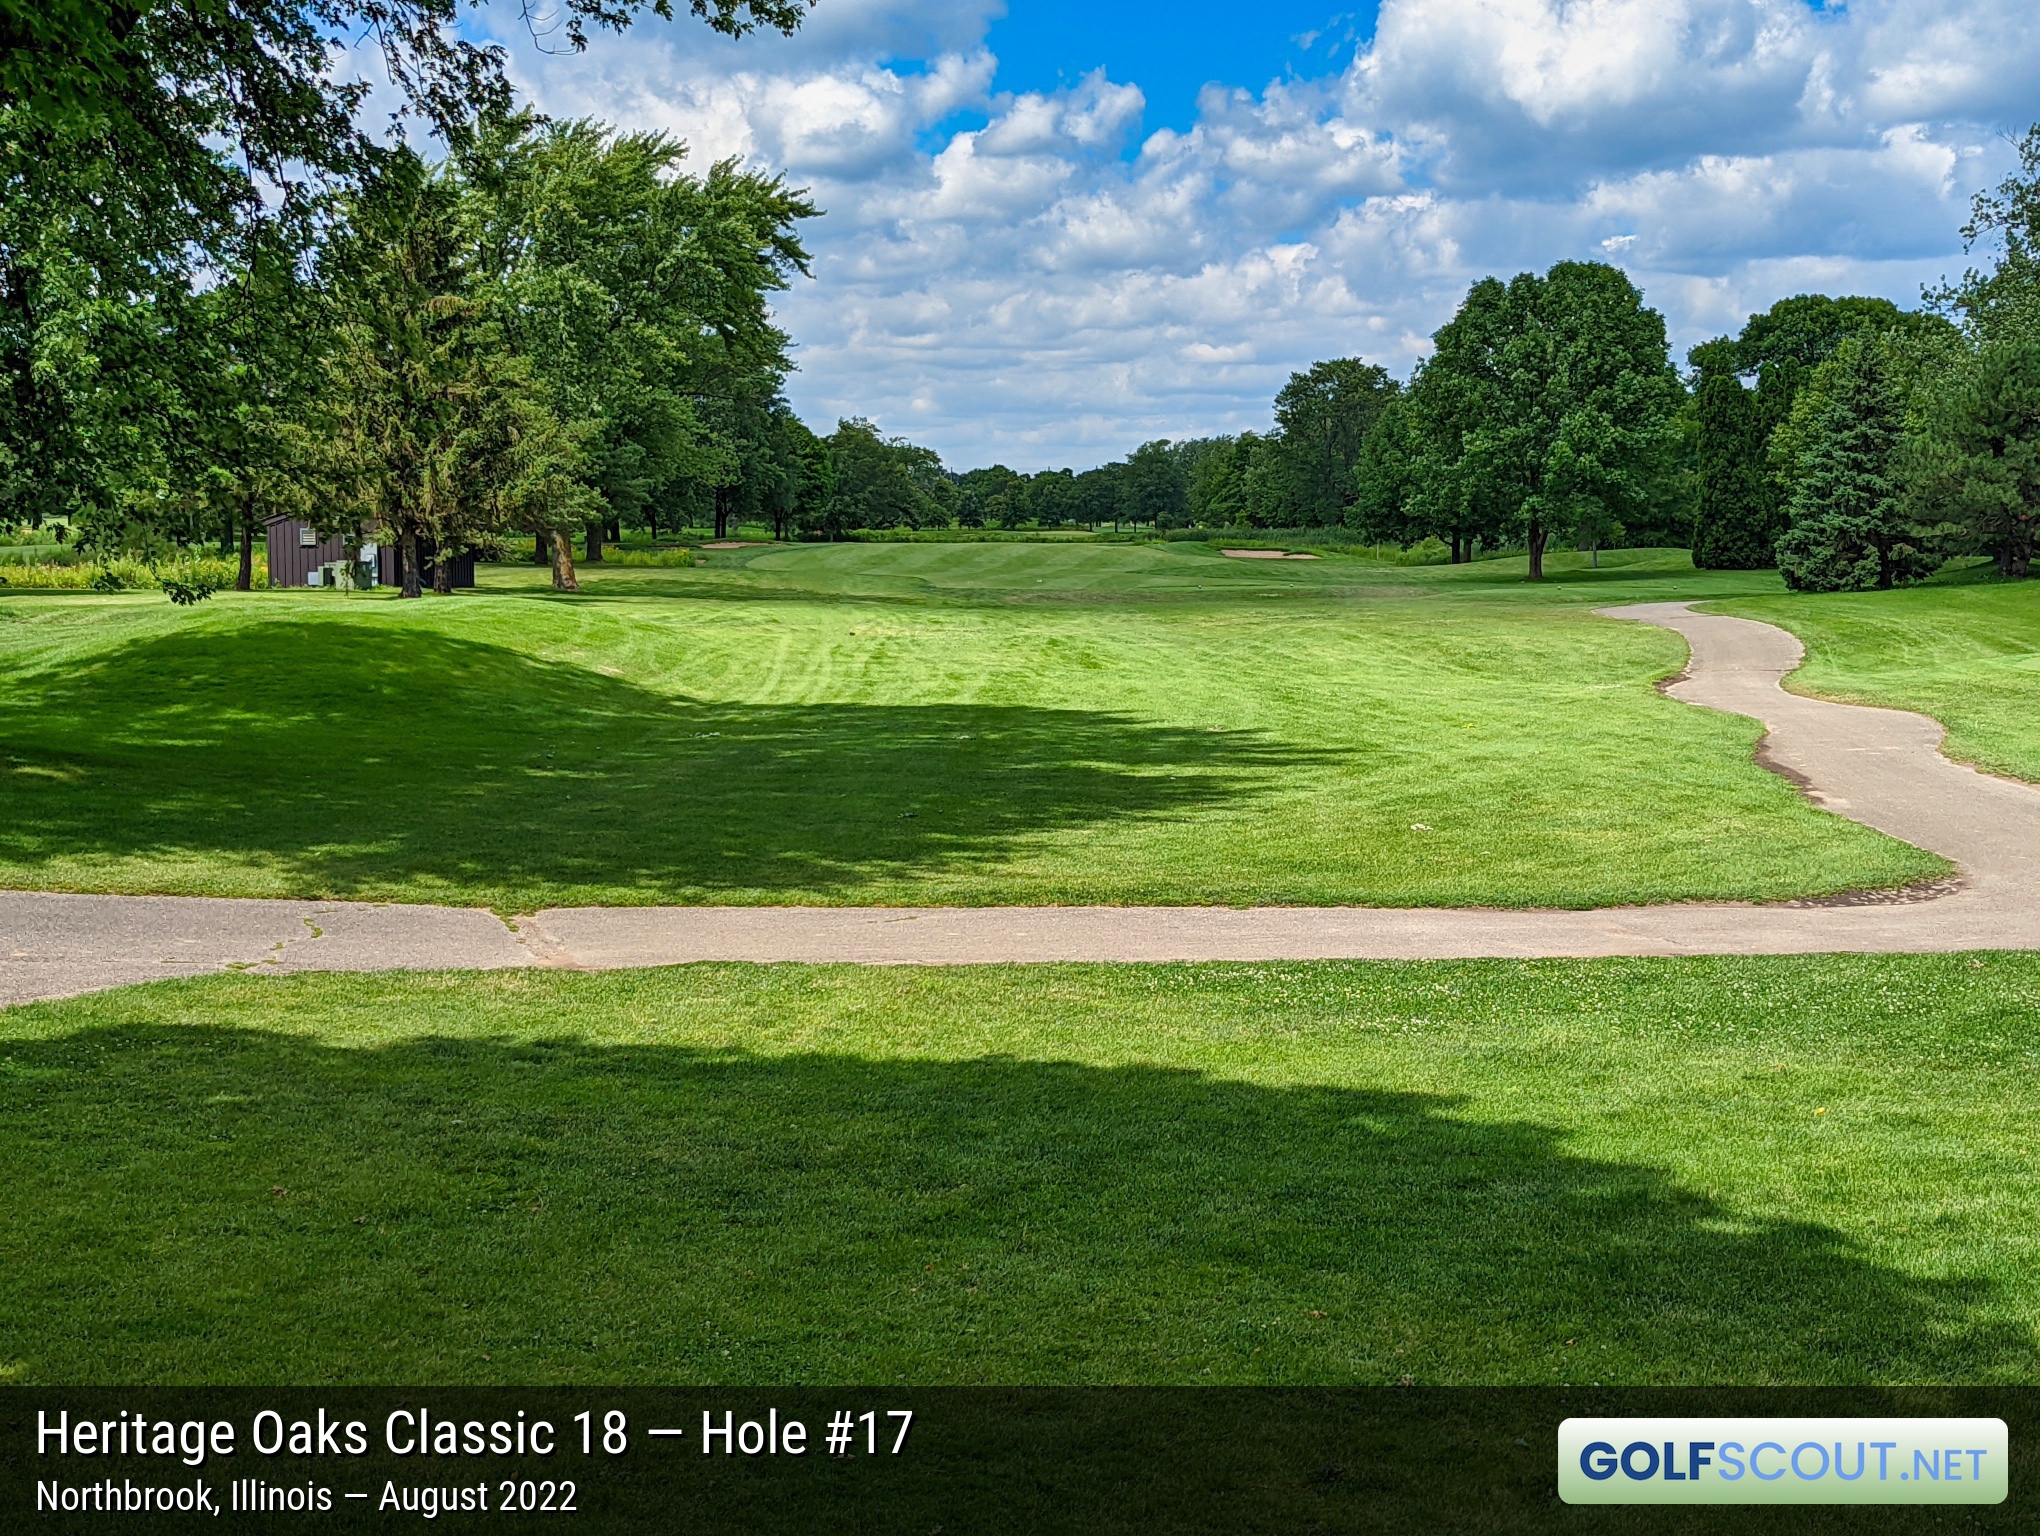 Photo of hole #17 at Heritage Oaks Golf Club - Classic 18 in Northbrook, Illinois. 